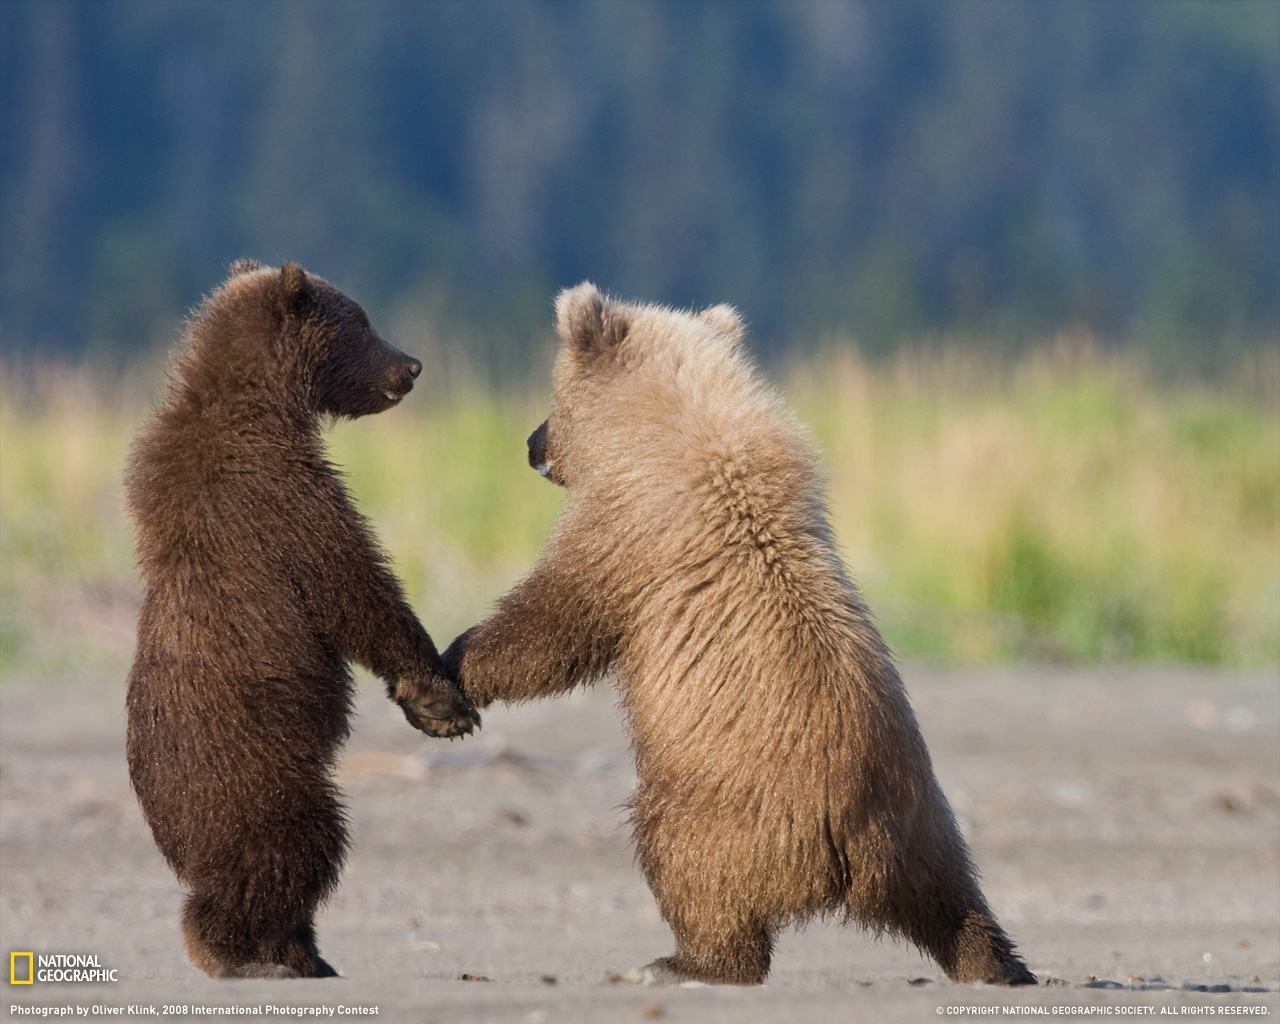 Grizzly Bears Wallpaper Pictures For Desktop